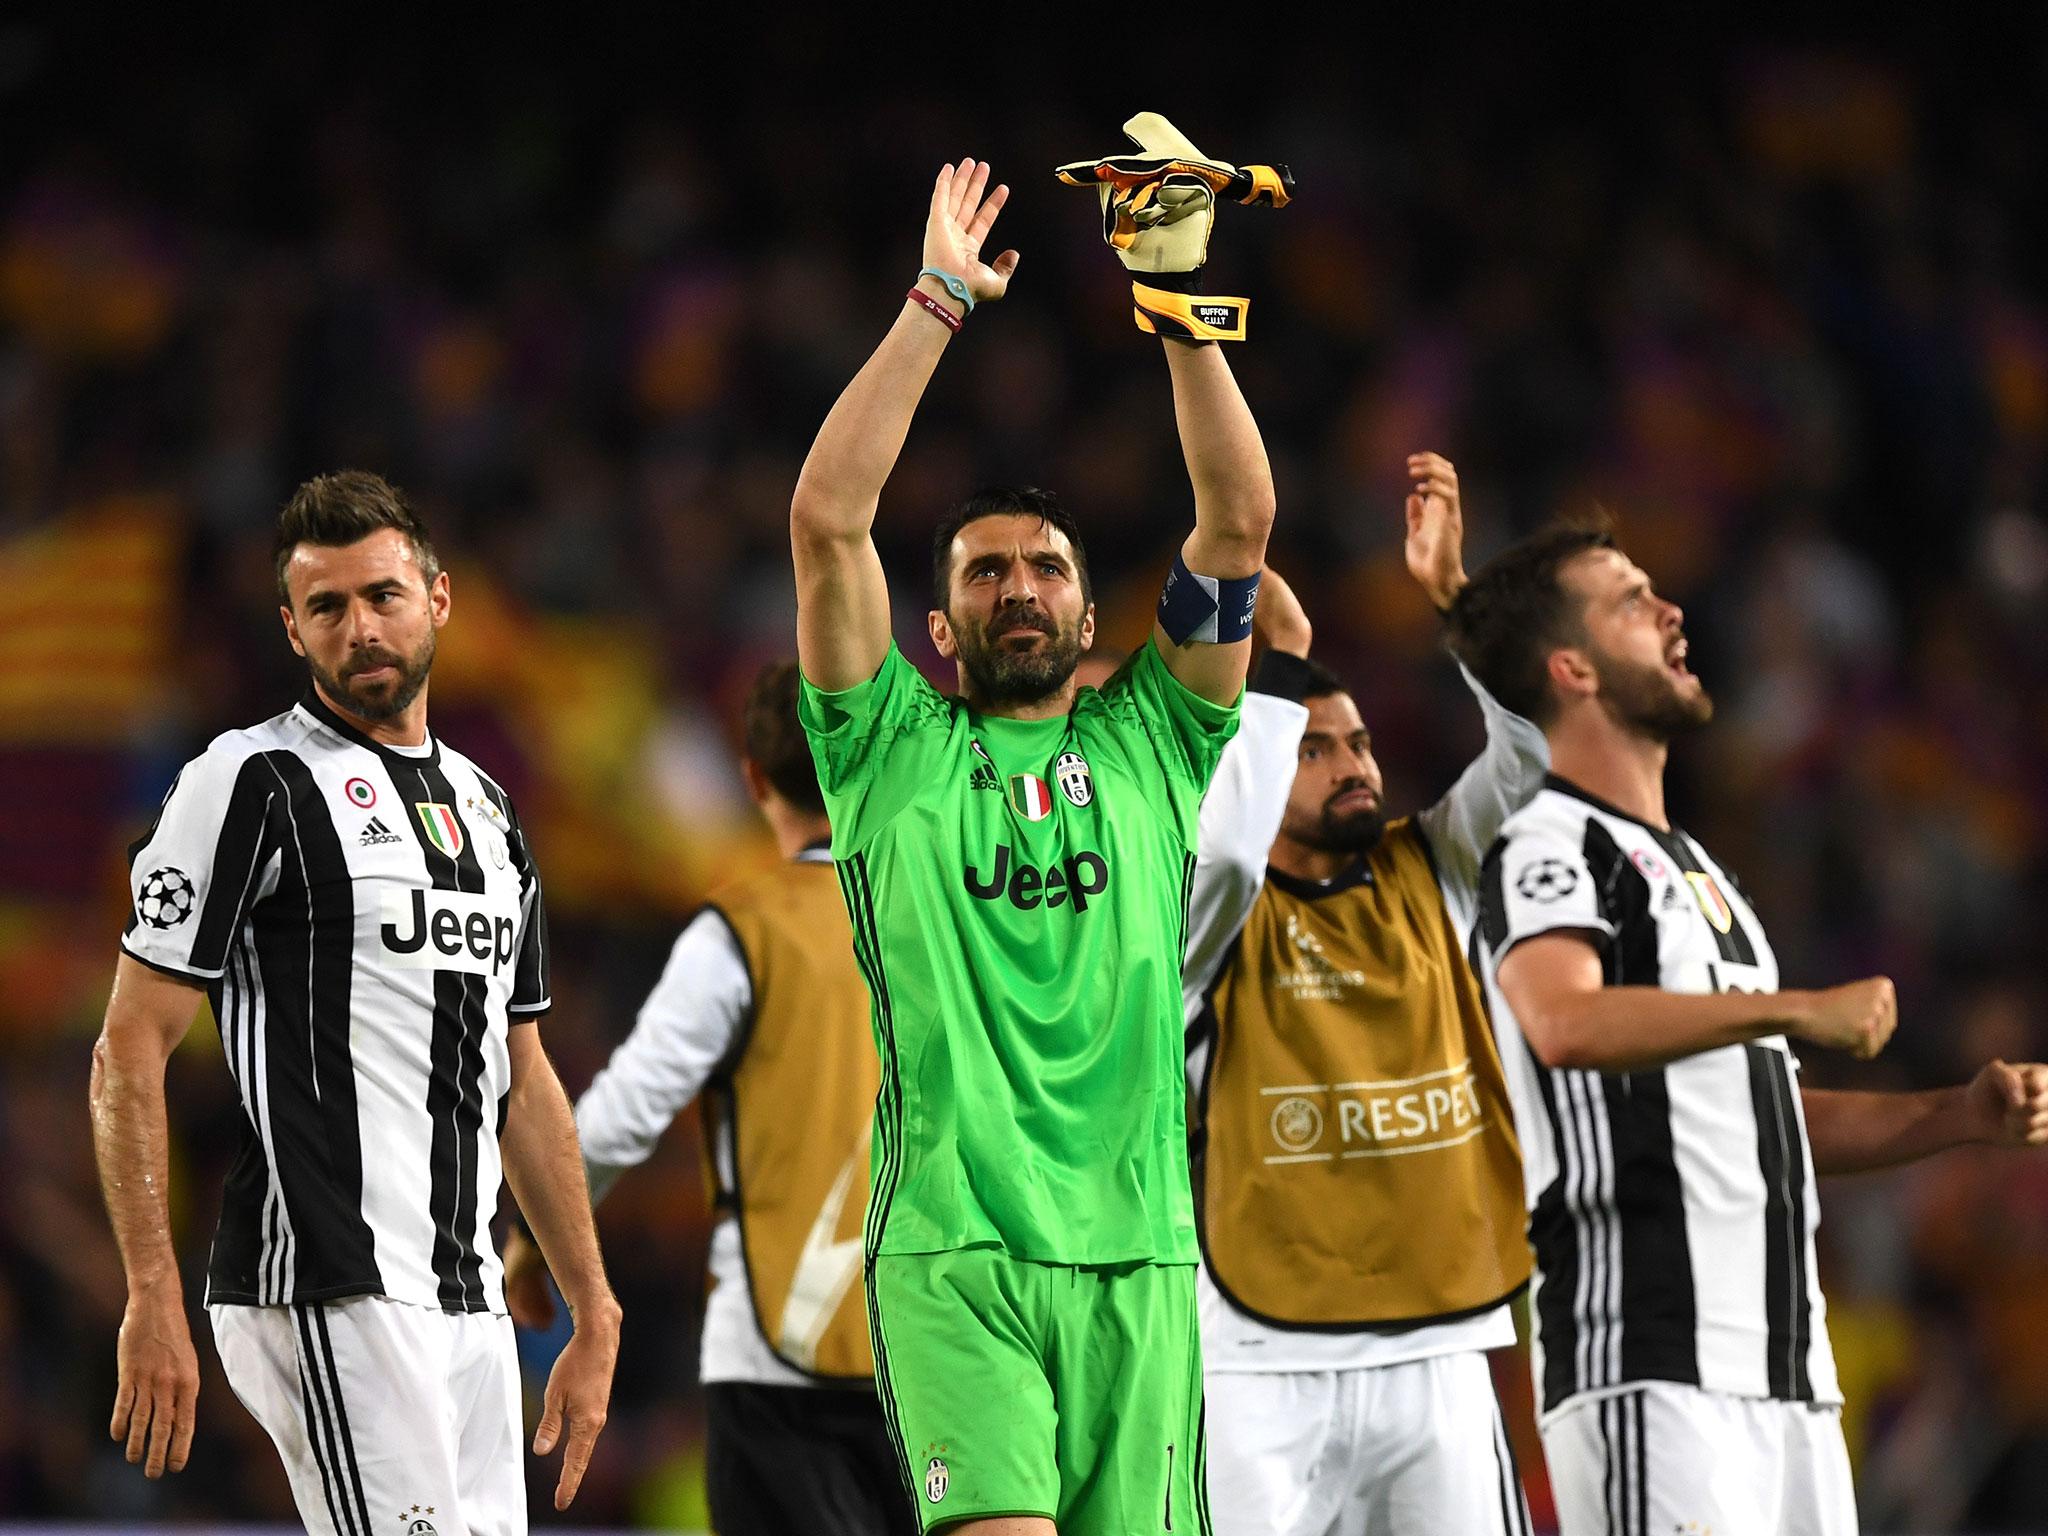 Buffon has played a crucial role at the heart of Juventus' defence